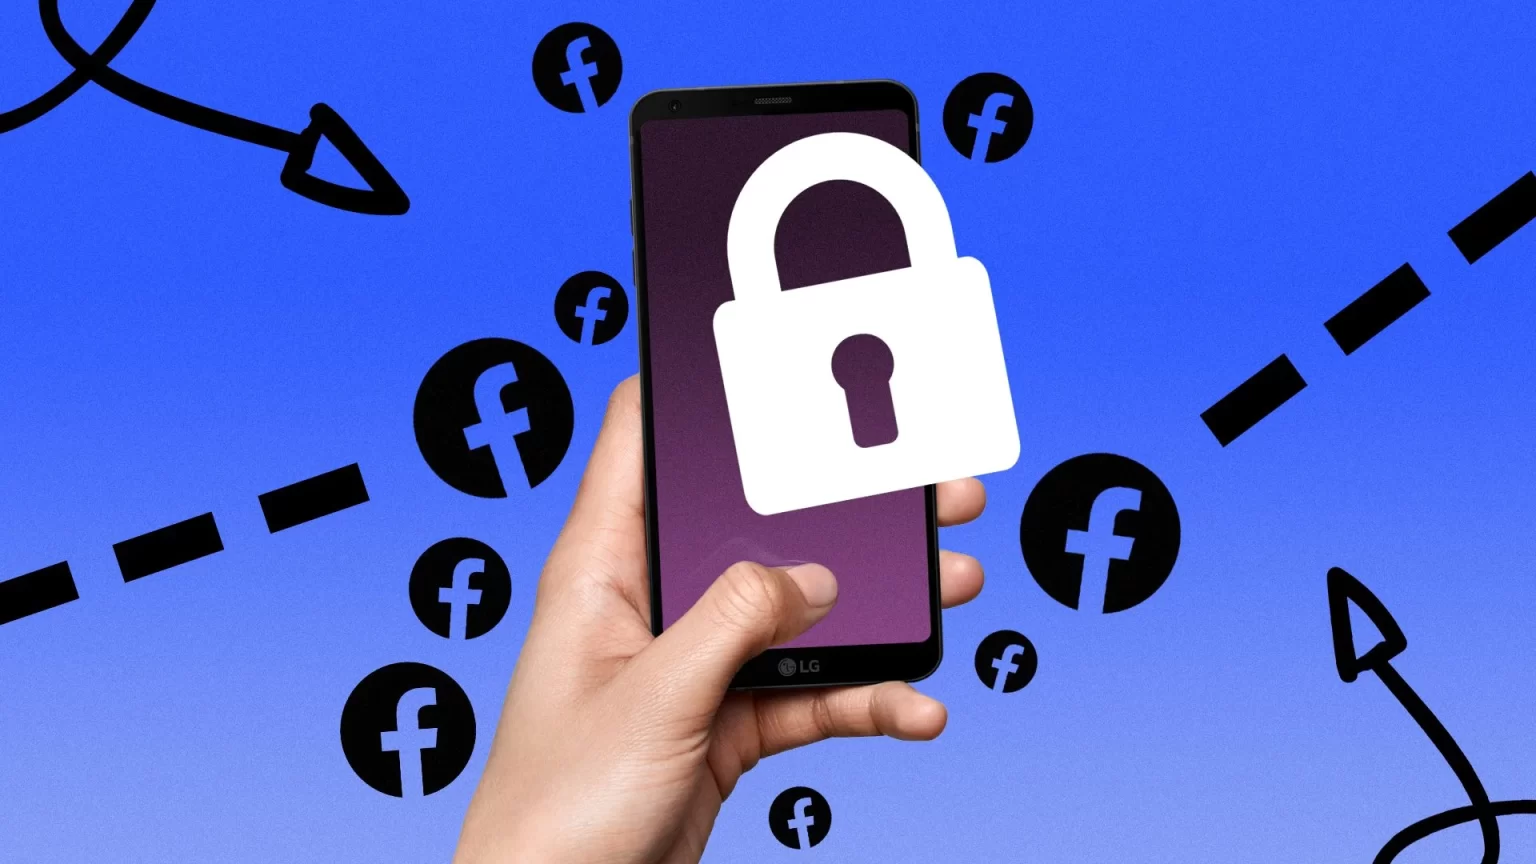 facebooksecurity 1536x864 - 5 ways to secure your social media account